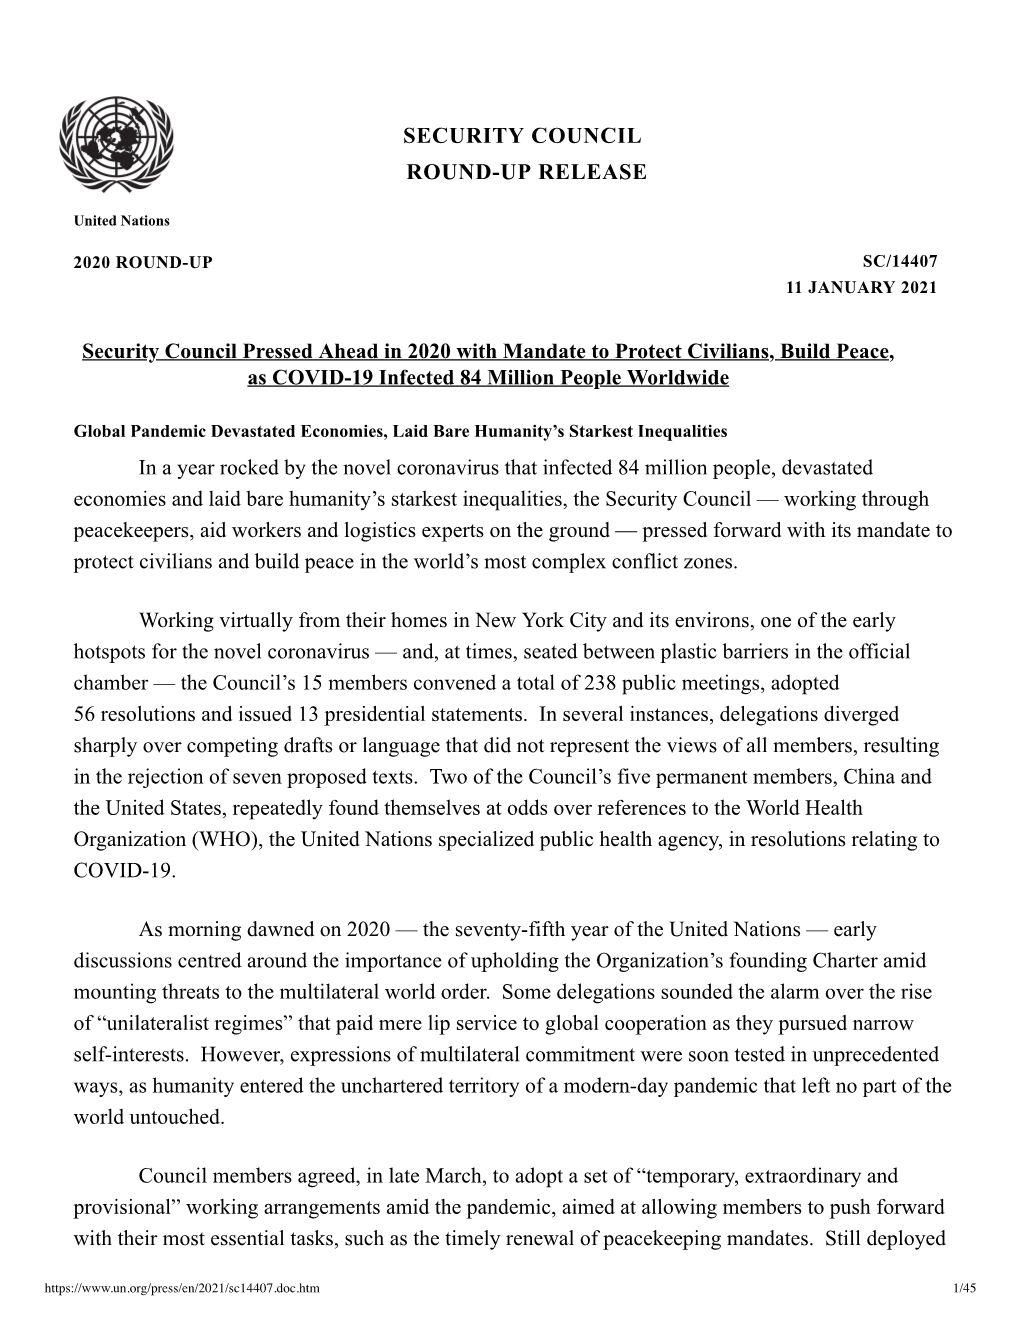 Round-Up Release Security Council